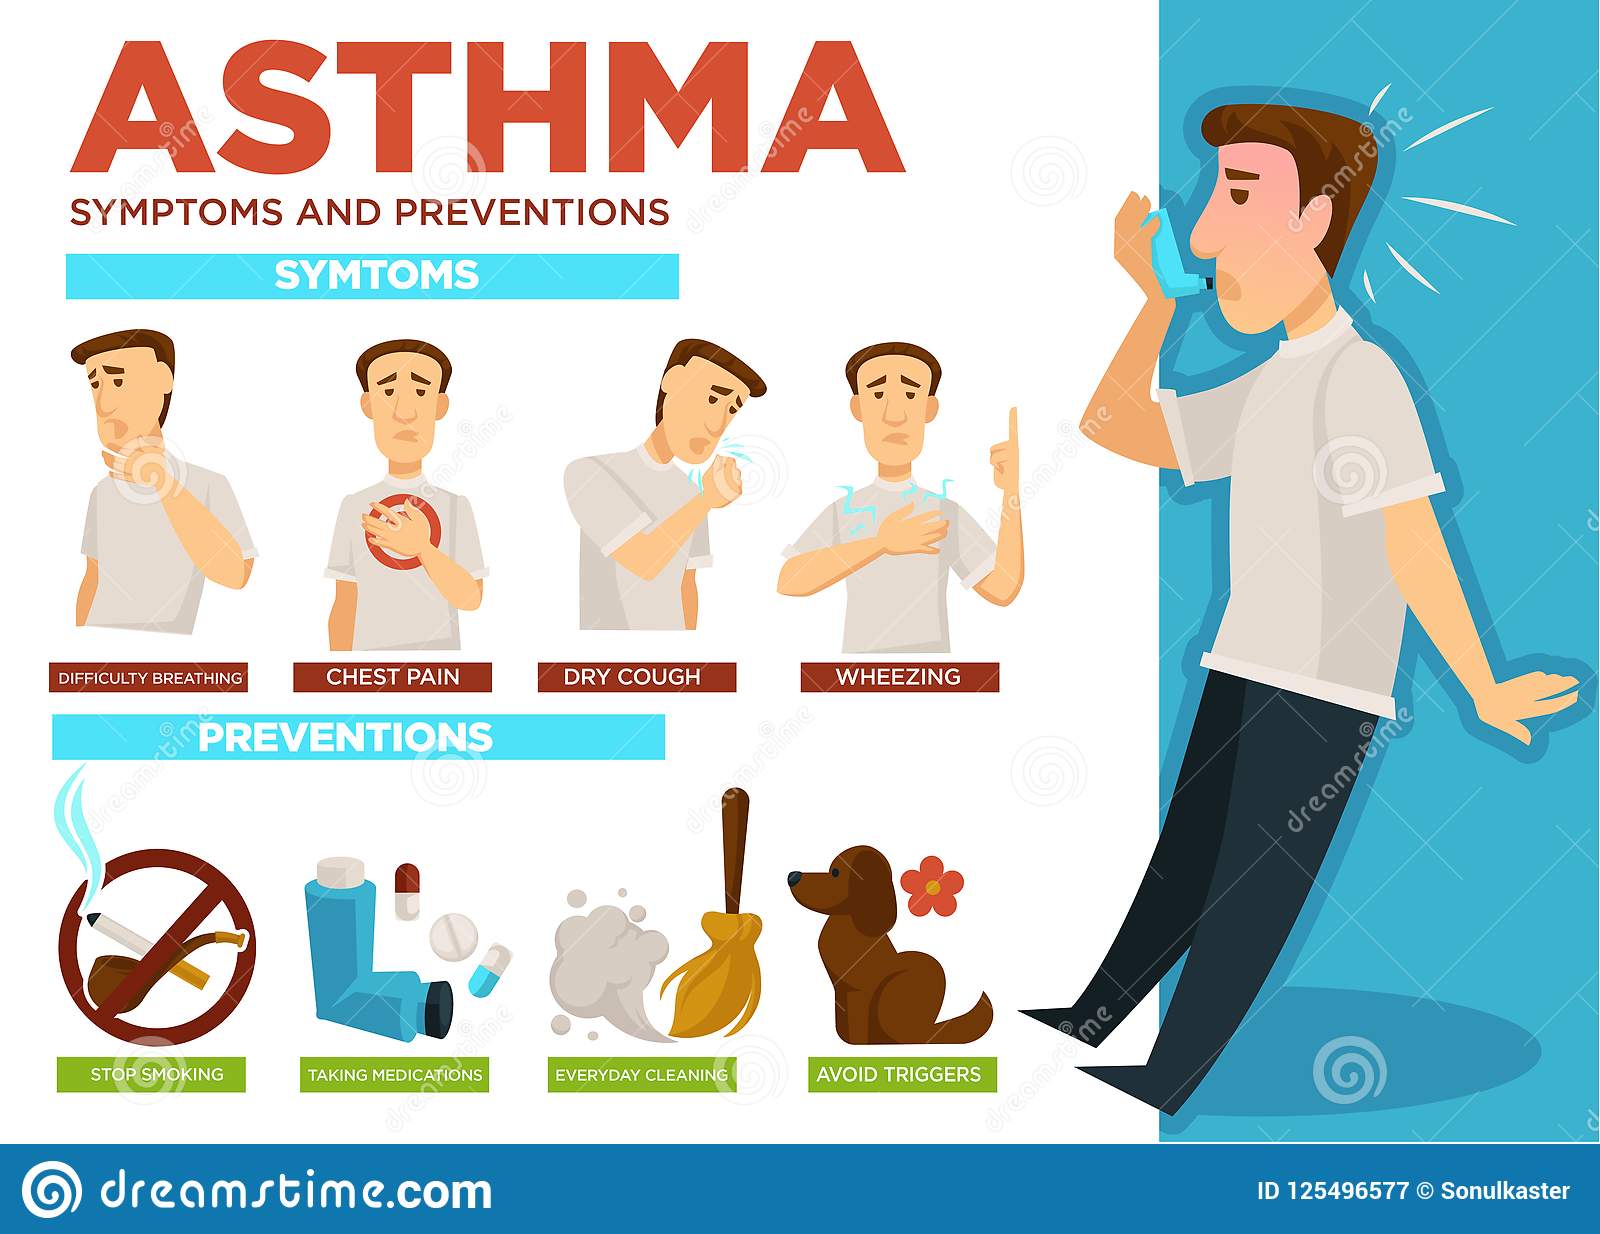 Asthma Symptoms And Prevention Of Disease Infographic ...